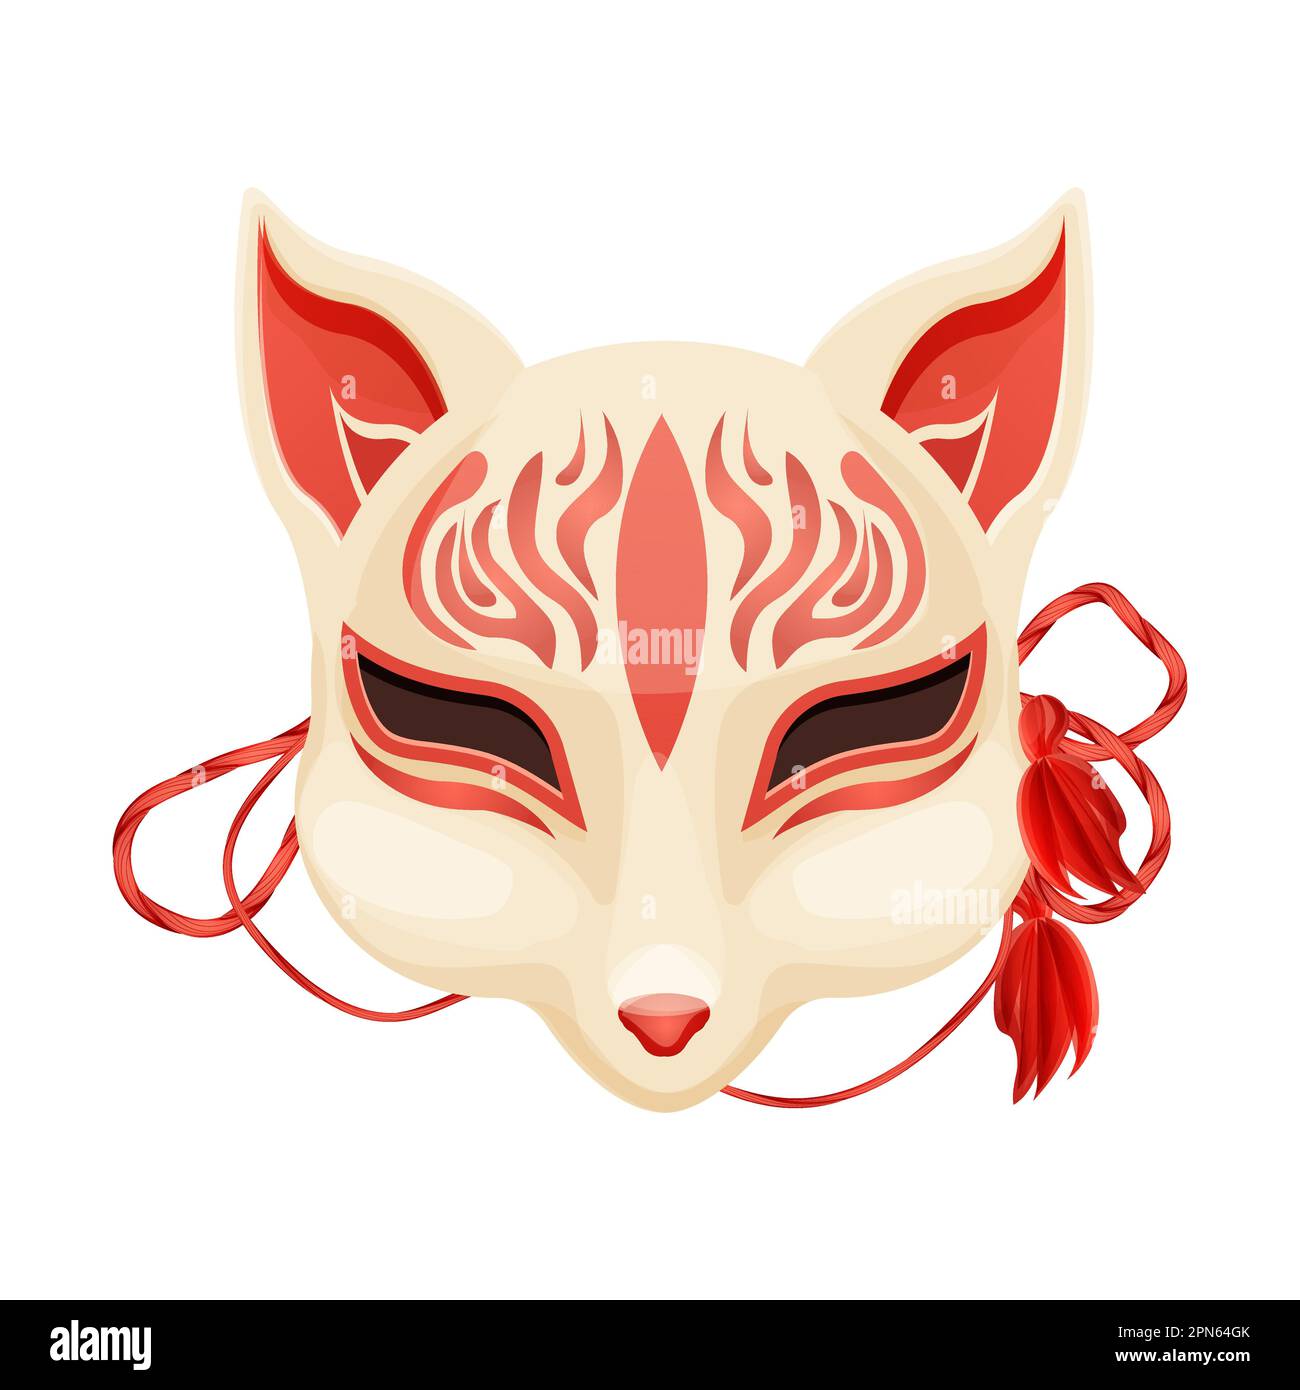 Kitsune kyoto Cut Out Stock Images & Pictures - Alamy